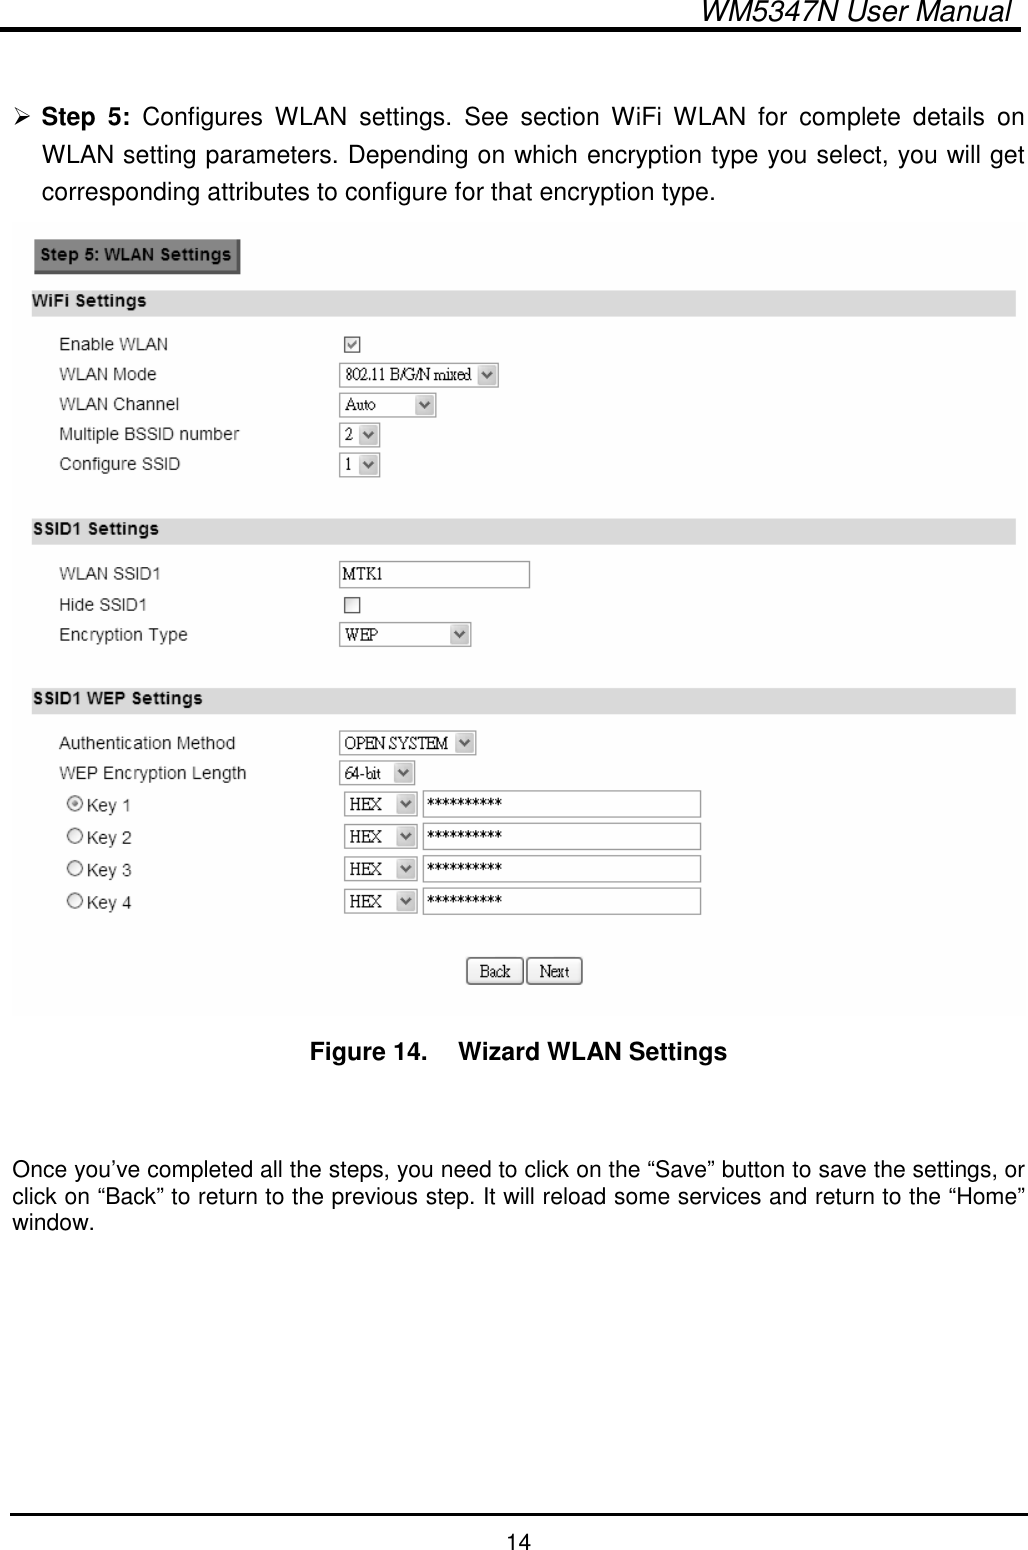  WM5347N User Manual  14   Step  5:  Configures  WLAN  settings.  See  section  WiFi  WLAN  for  complete  details  on WLAN setting parameters. Depending on which encryption type you select, you will get corresponding attributes to configure for that encryption type.  Figure 14.   Wizard WLAN Settings   Once you’ve completed all the steps, you need to click on the “Save” button to save the settings, or click on “Back” to return to the previous step. It will reload some services and return to the “Home” window.  